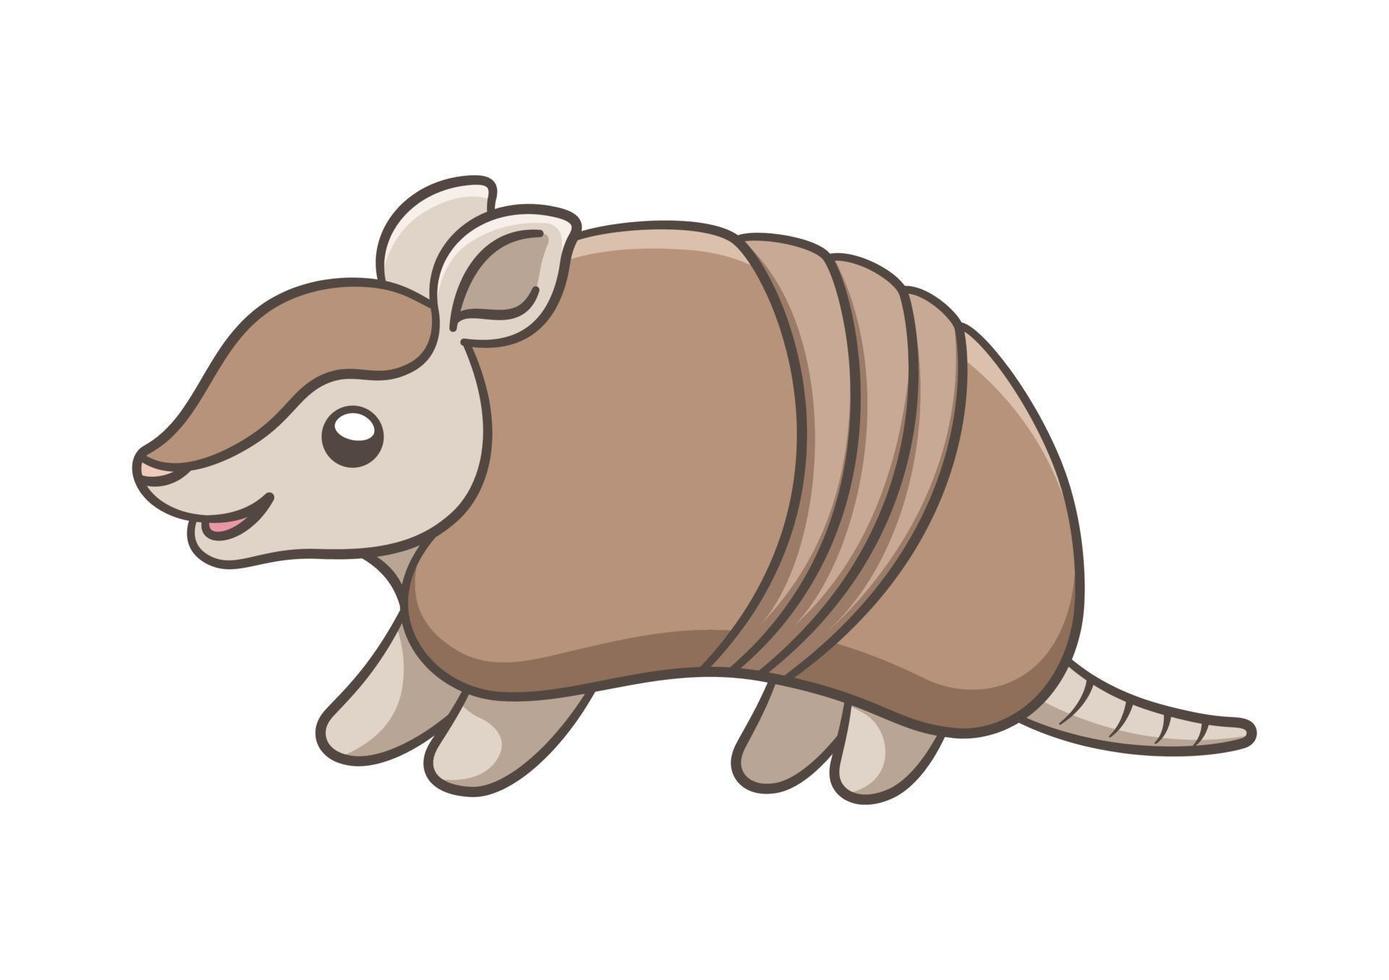 Armadillo standing and smiling cartoon vector illustration simple version. Cute animal character design for kids.